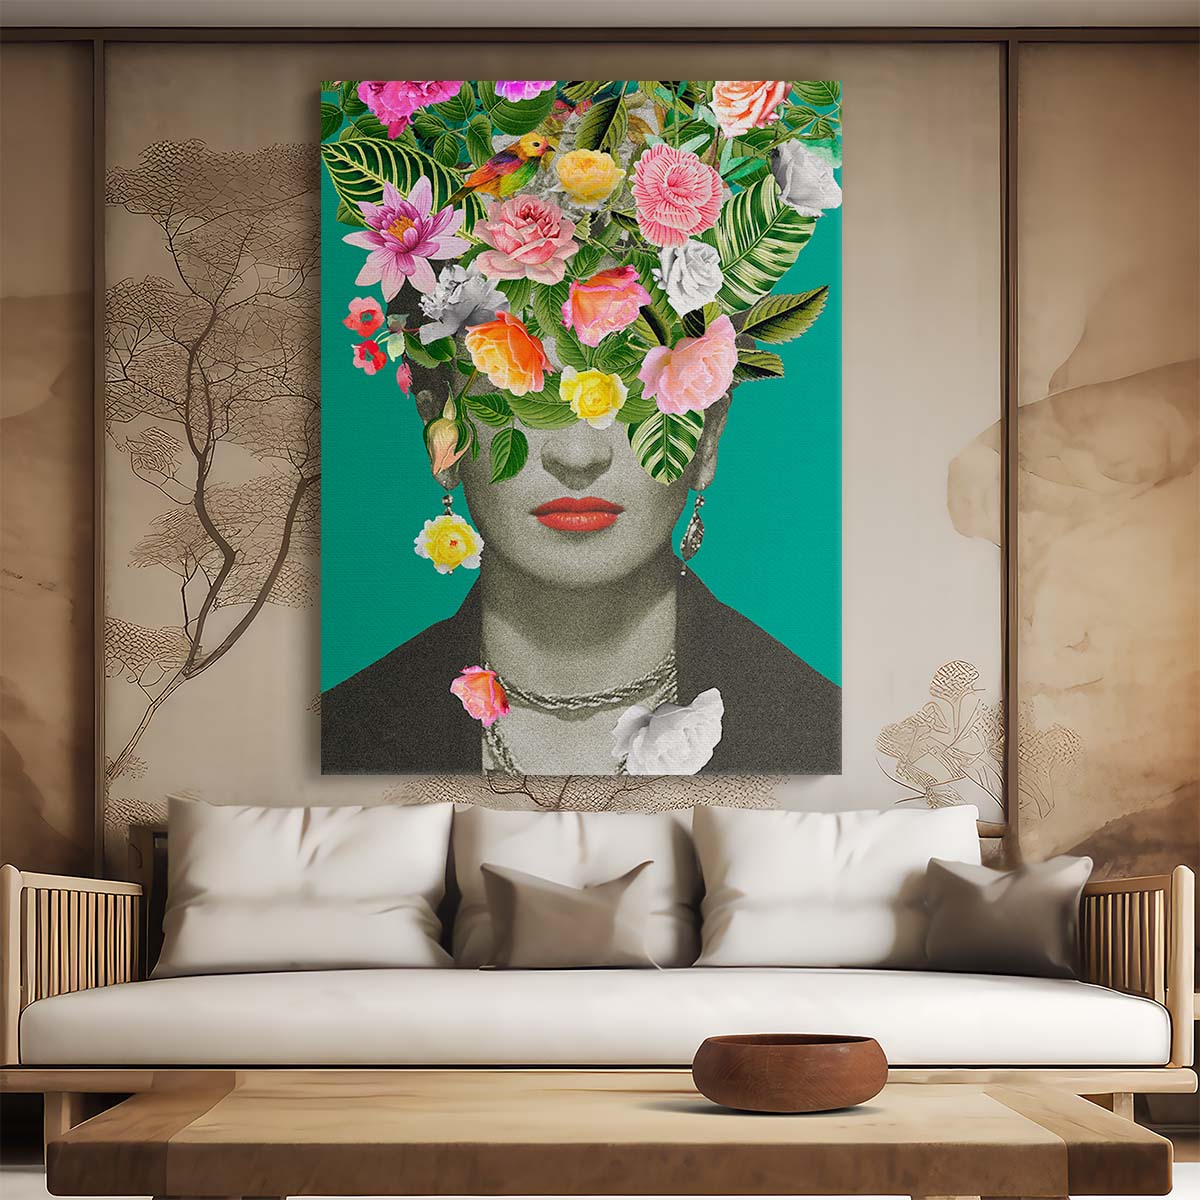 Frida Kahlo Inspired Colorful Floral Bird Woman Portrait Photography by Luxuriance Designs, made in USA